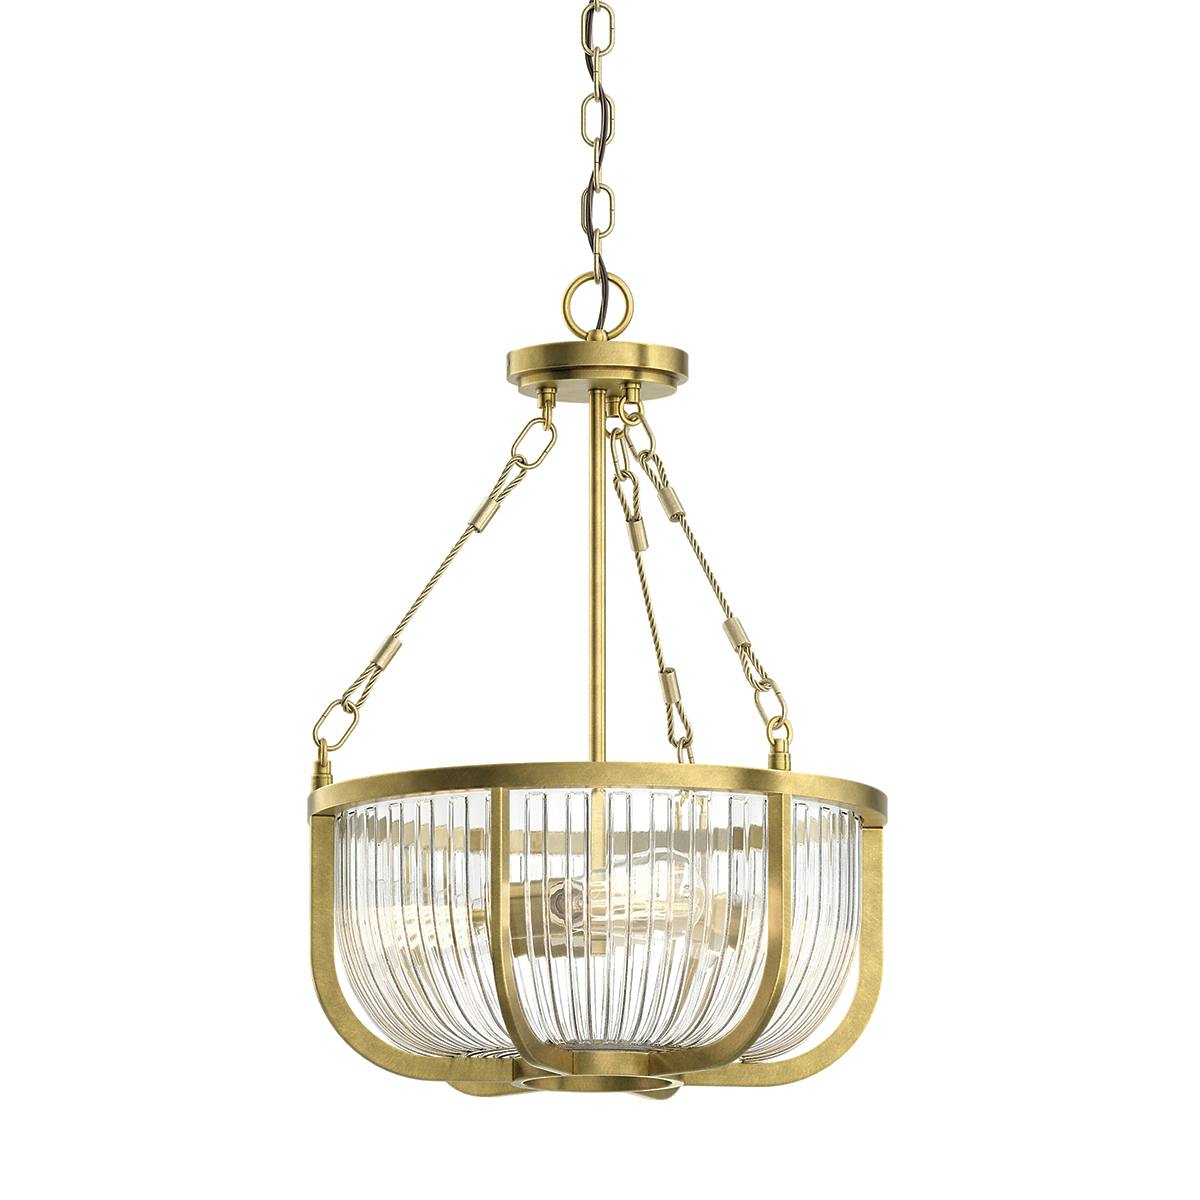 Close up view of the Roux 22.25" 3 Light Pendant Natural Brass on a white background